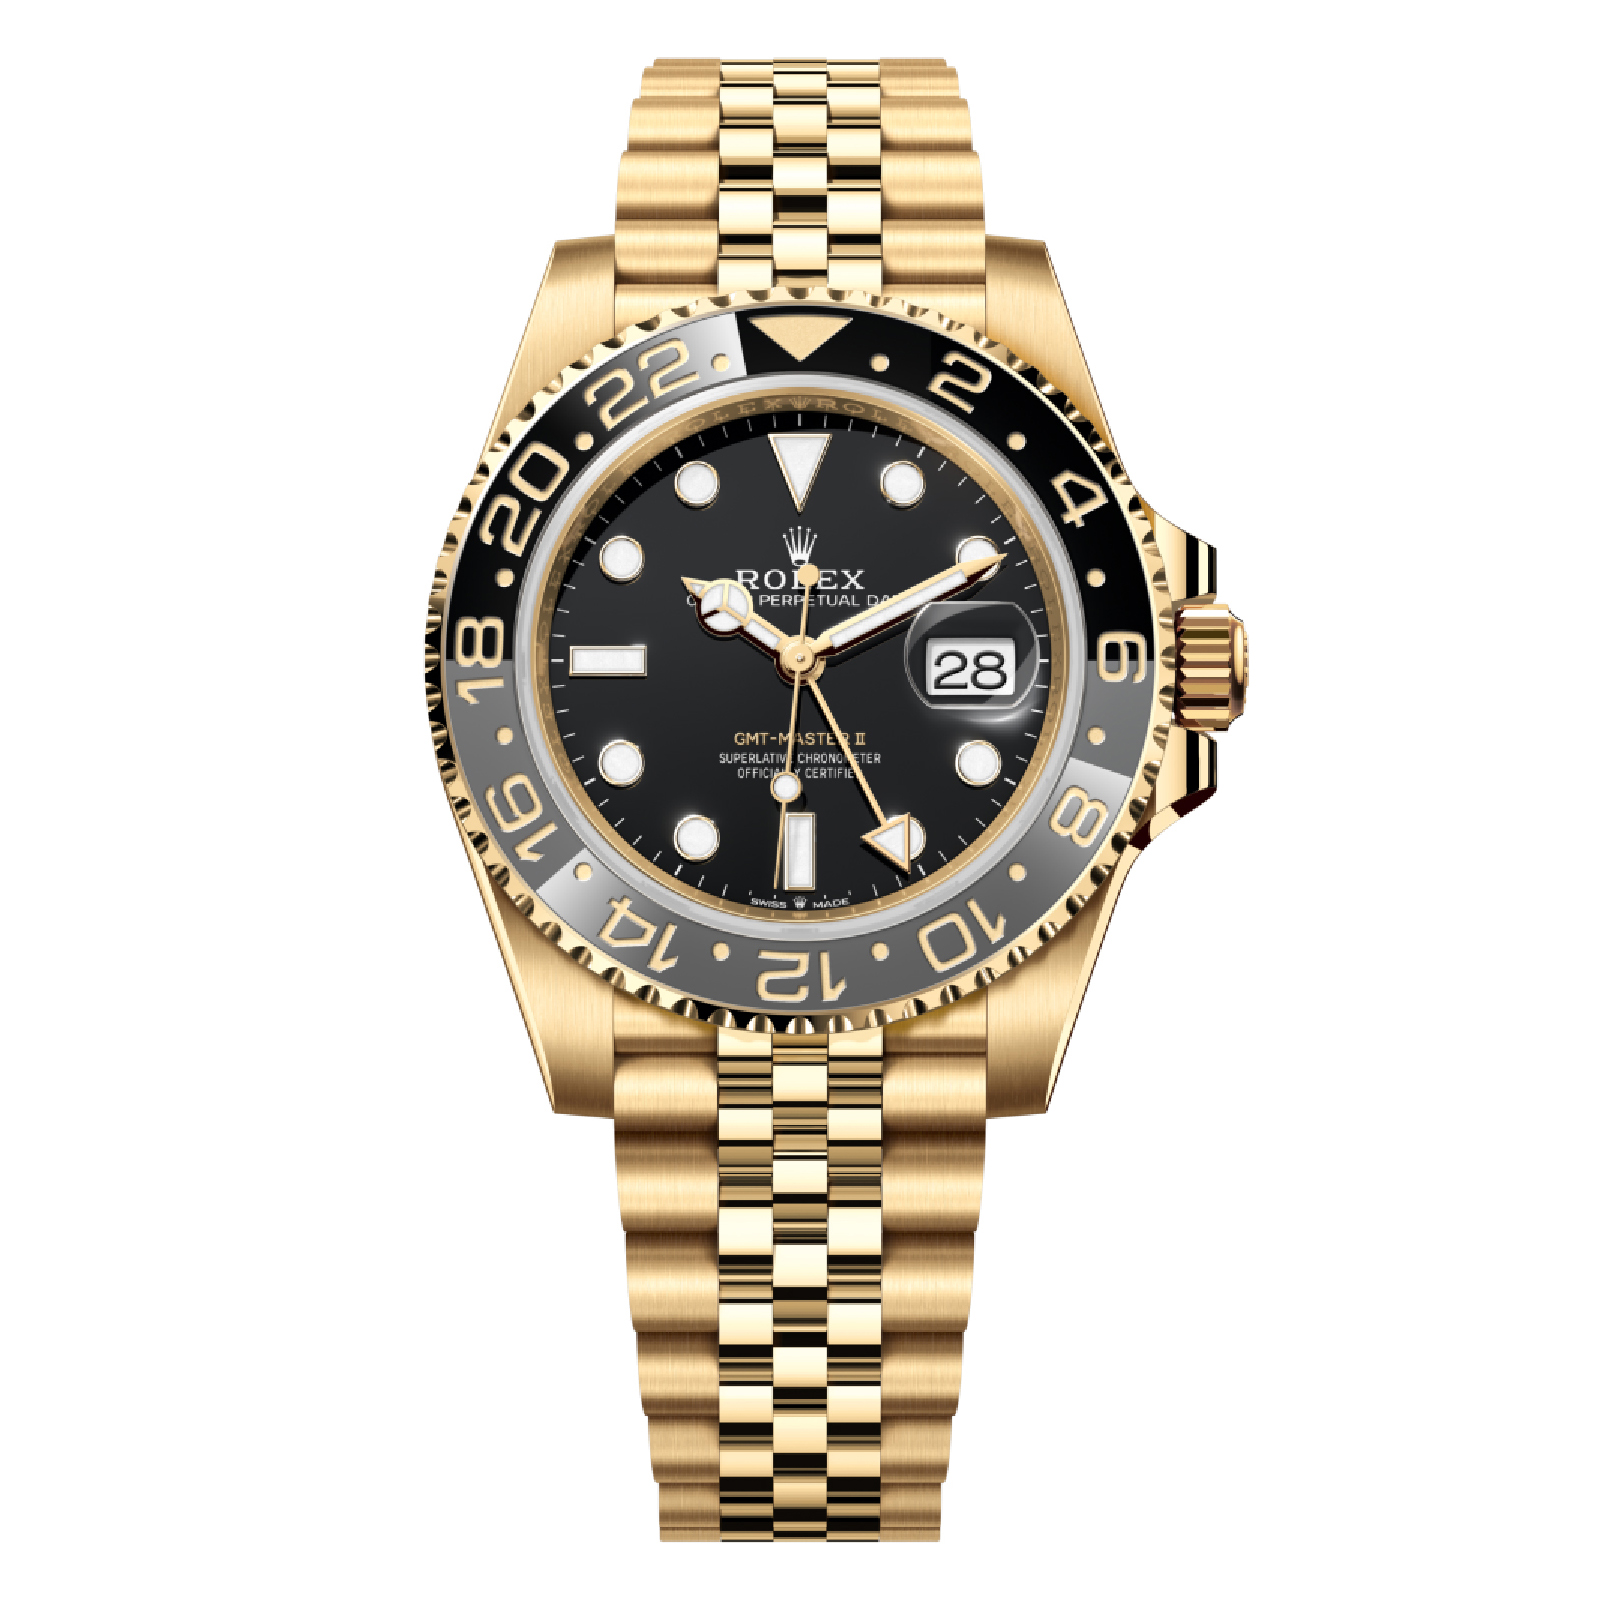 Rolex GMT Master II Yellow Gold Jubilee | The Watch Meister